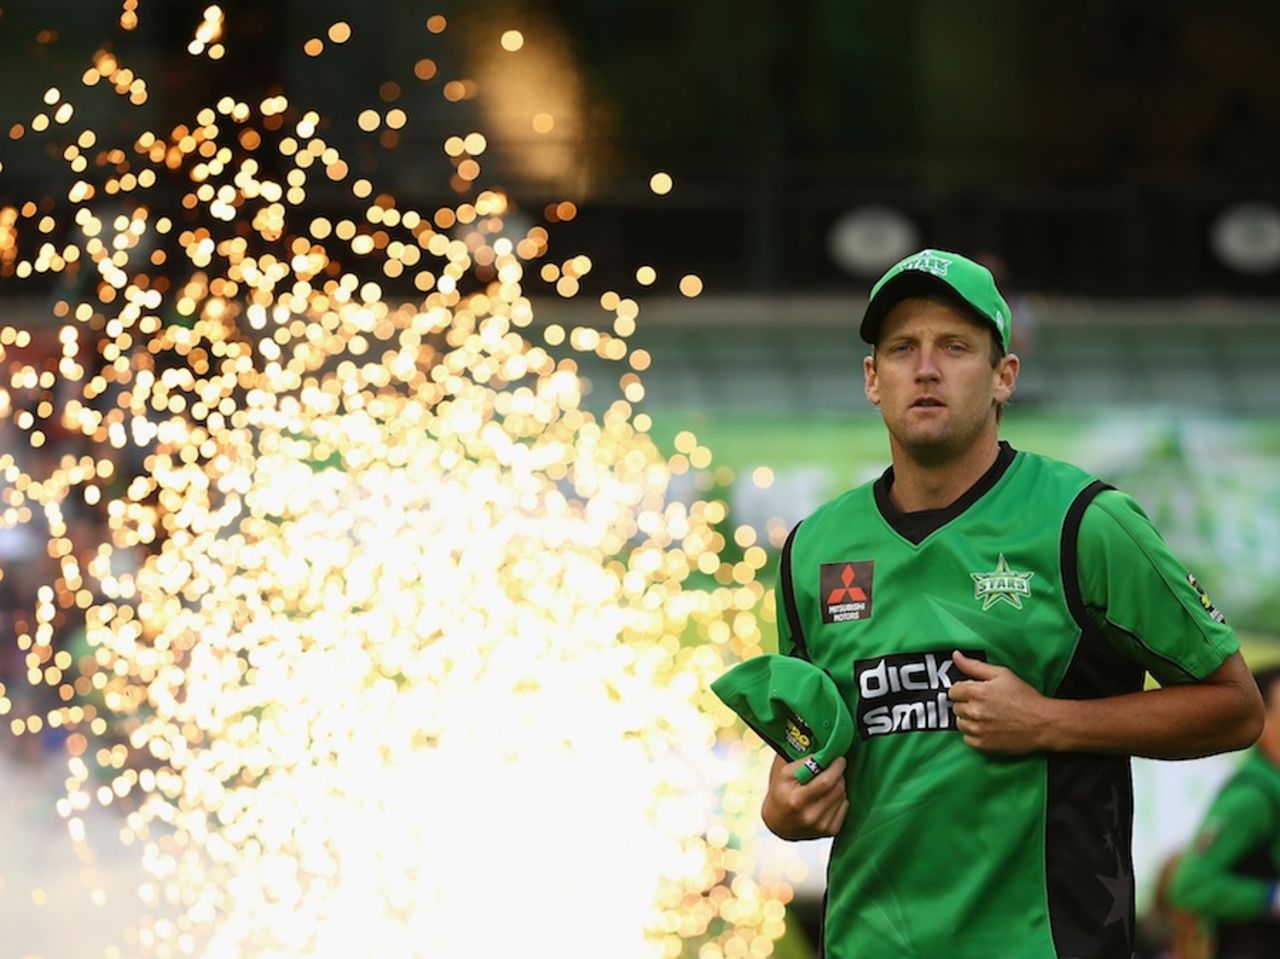 Cameron White takes the field at the start of the match, Melbourne Stars v Hobart Hurricanes, Big Bash League, Melbourne, January 21, 2014